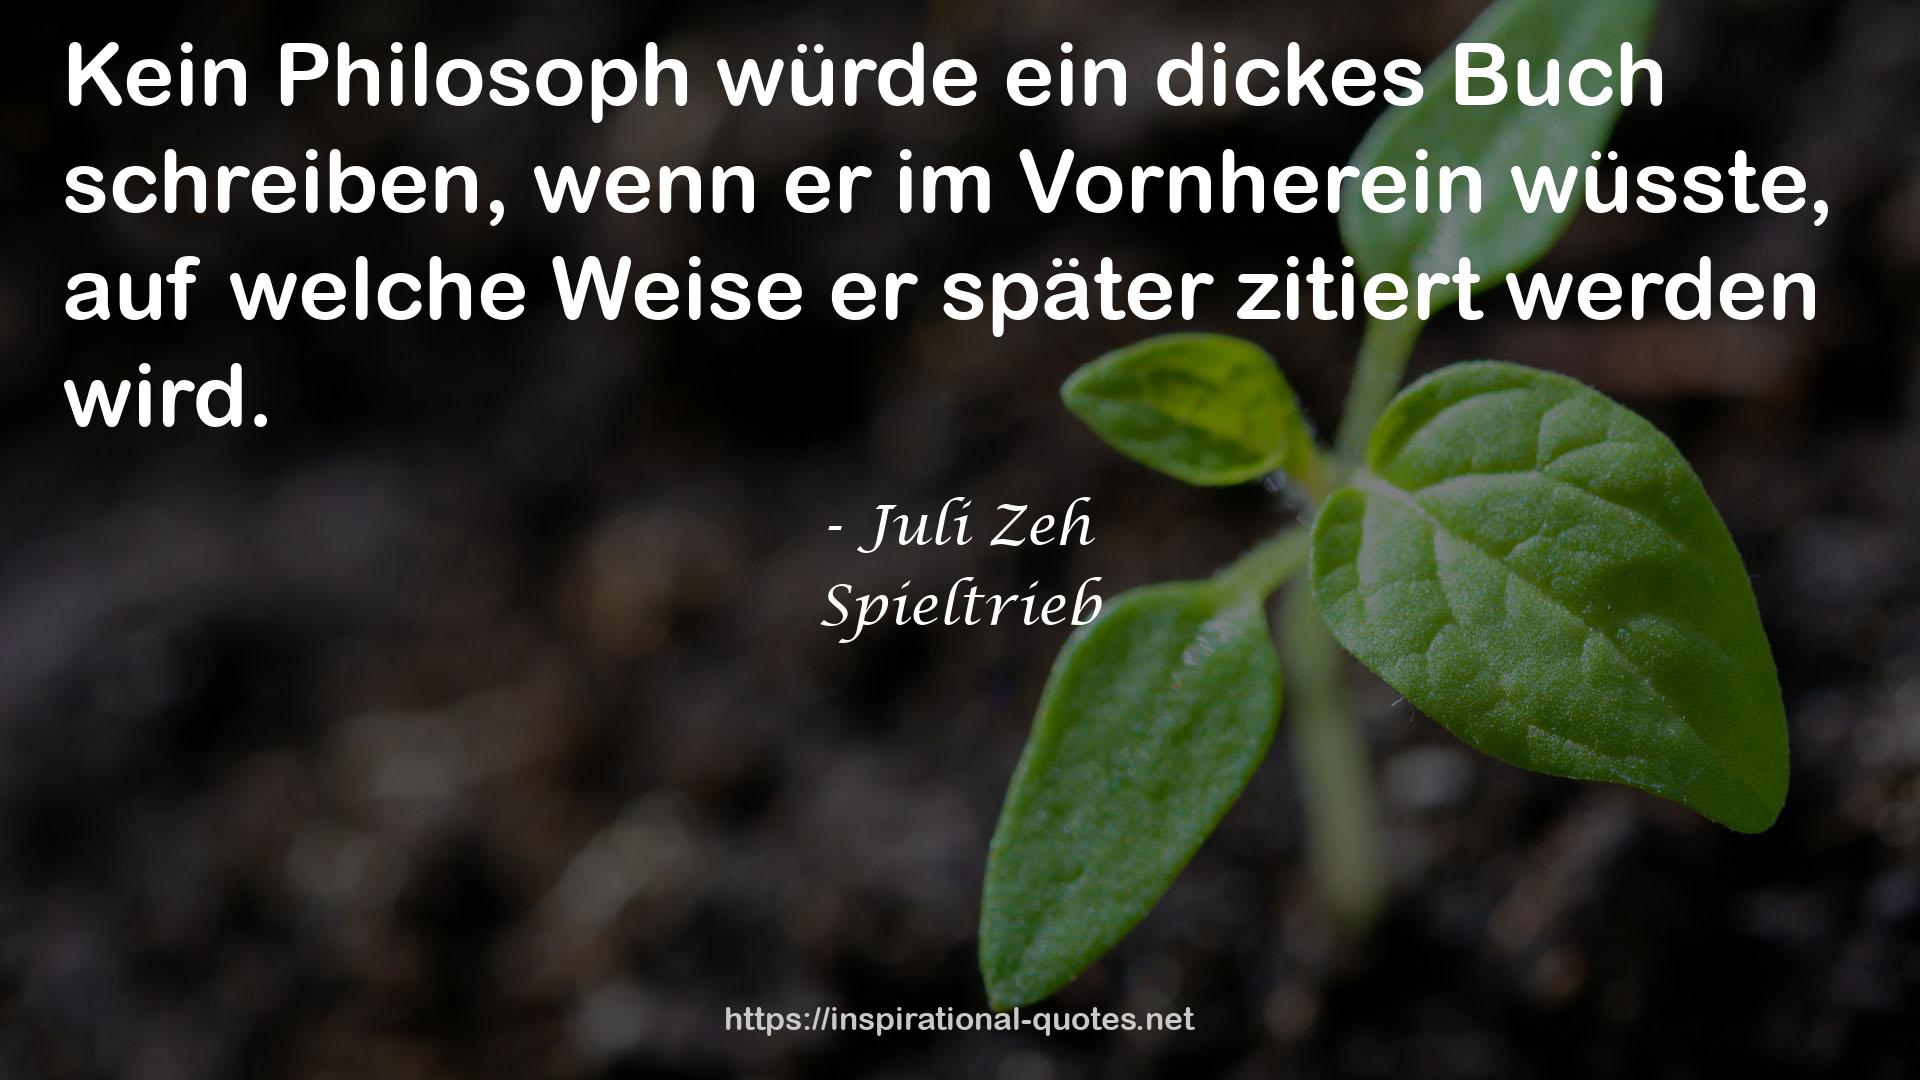 Buch  QUOTES